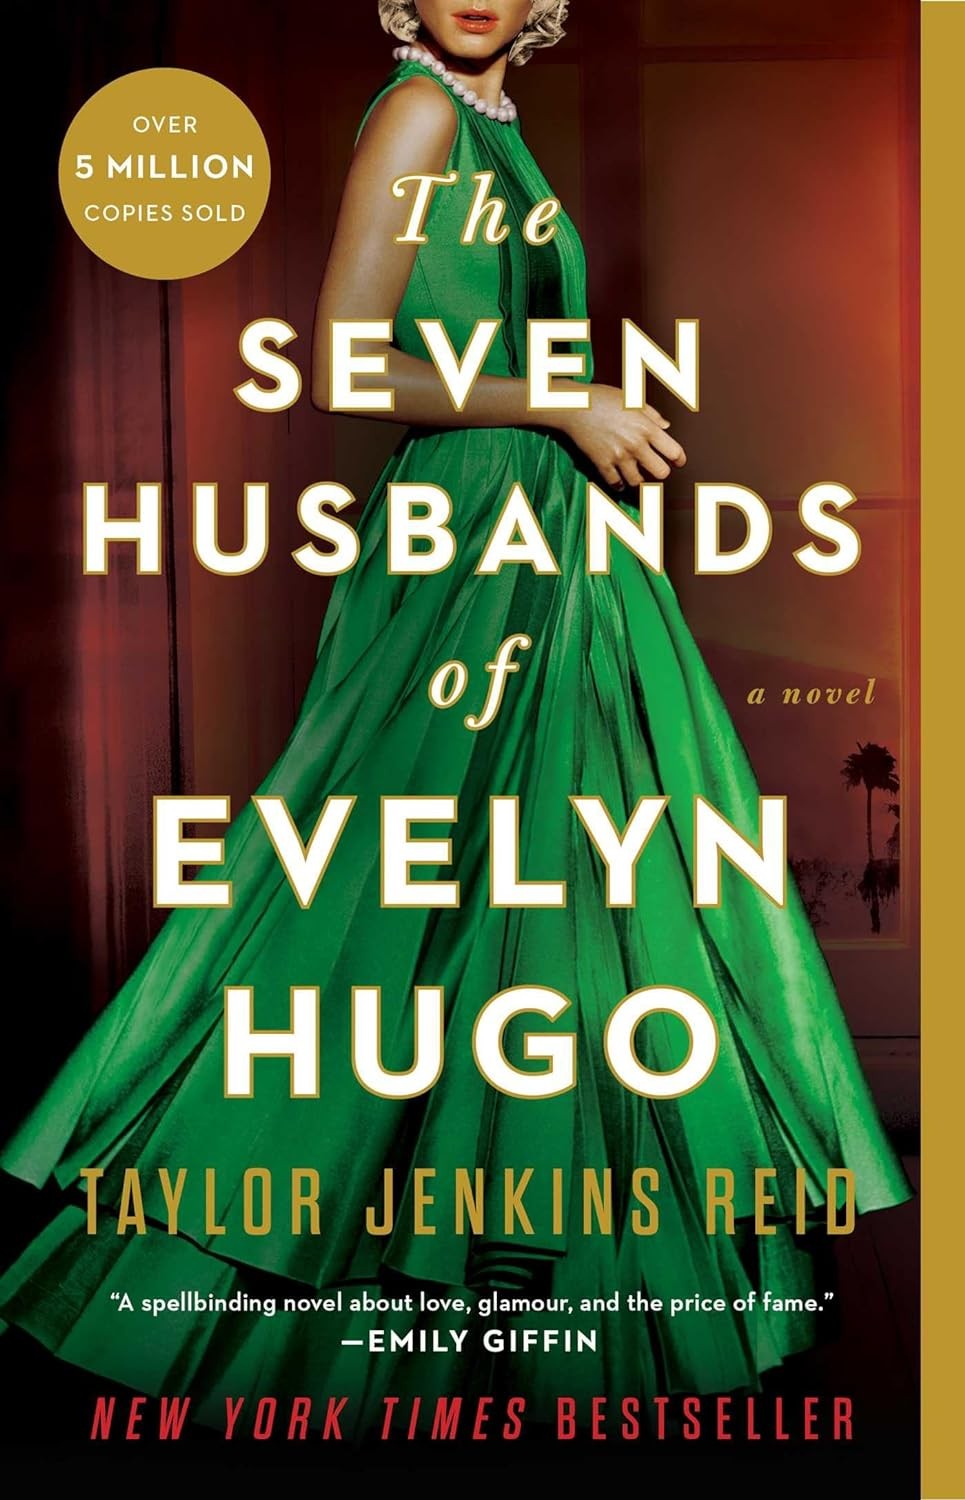 <p>When starlet Evelyn Hugo chooses Monique Grant to pen her life story, the unknown reporter is grateful (and very confused). As Evelyn reveals her rise to fame, and the seven husbands she married along the way, Monique gets a glimpse into the ambition, love, and loss that caught the entire world's attention.</p><p>"It really took me awhile to find another book that filled that [hole]," Hannah says.</p><p><em>The Seven Husbands Of Evelyn Hugo has a 4.6 rating on Amazon and 4.4 </em><em>on Goodreads, both out of 5.</em></p>